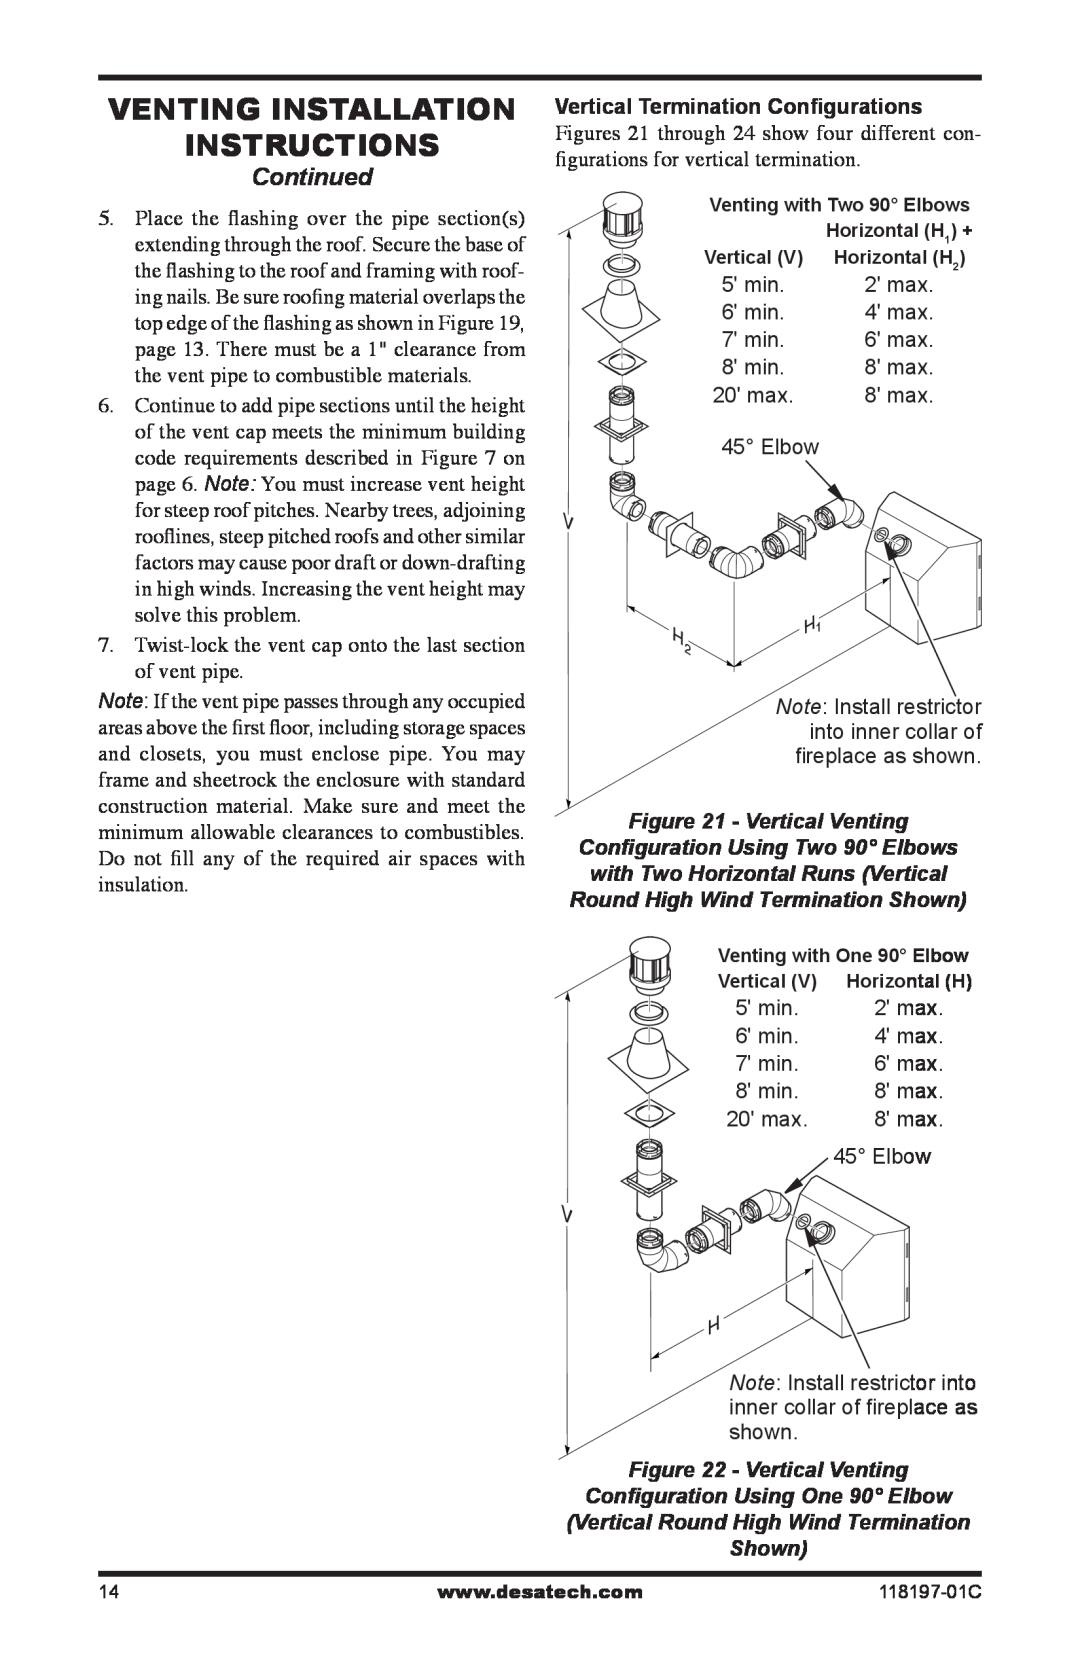 Desa (V)DVC42(B)(H) Venting Installation instructions, Continued, Vertical Venting Configuration Using Two 90 Elbows 